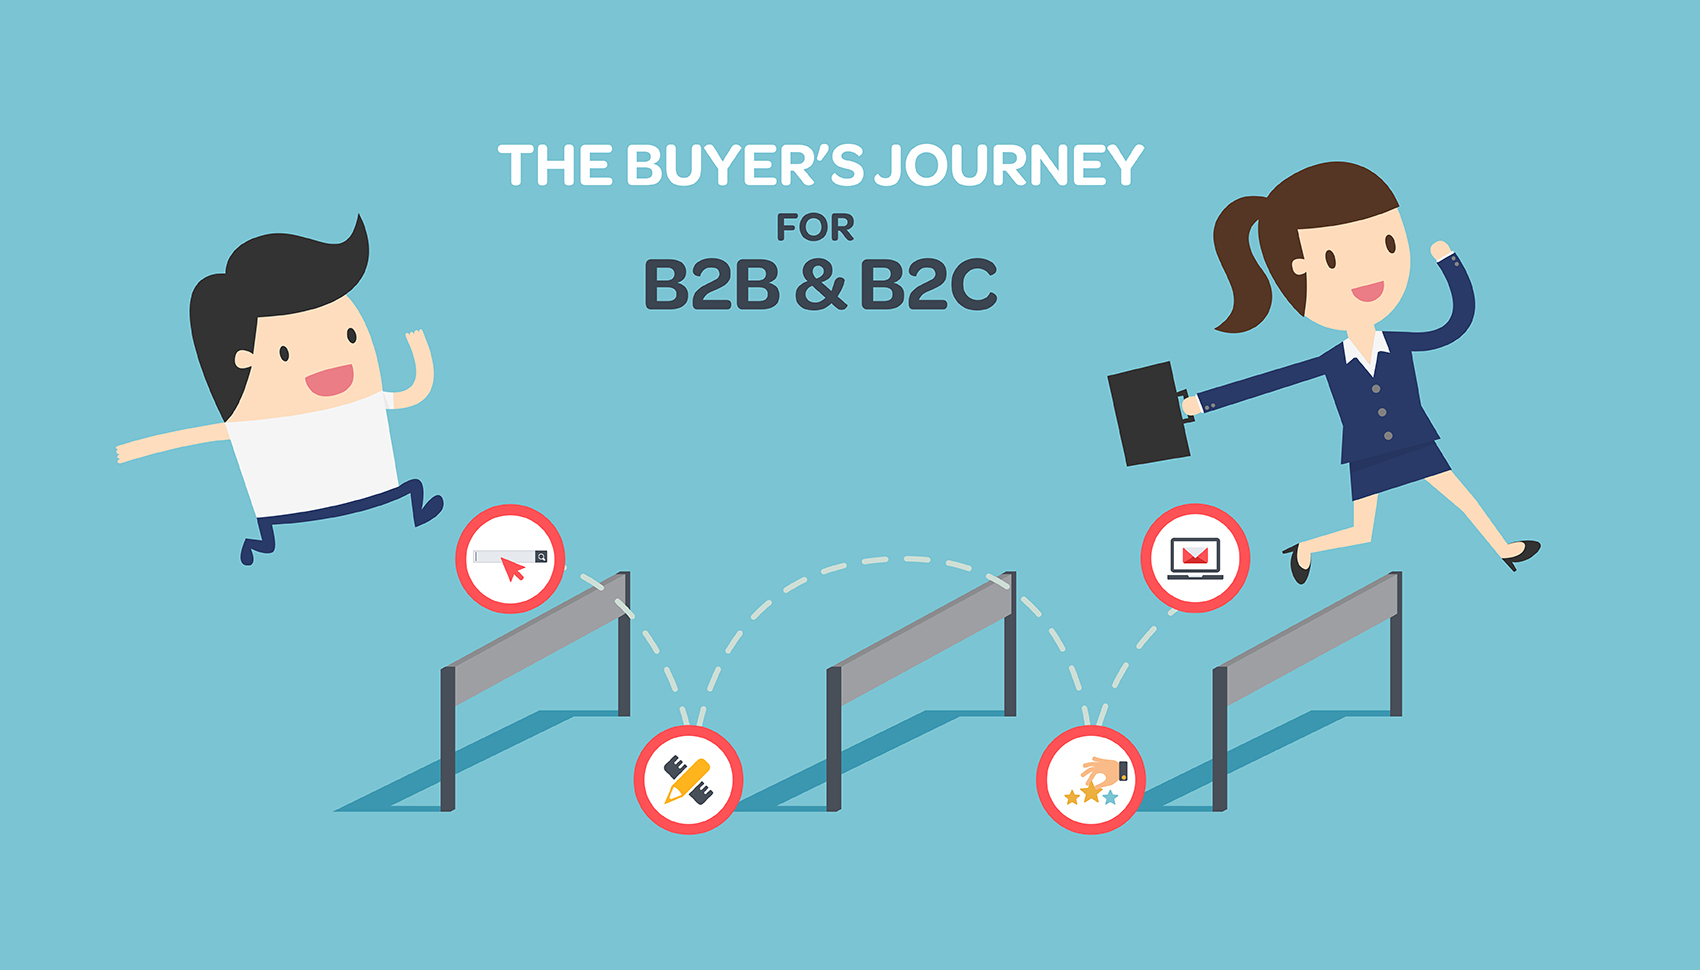 The buyers’ journey for B2B & B2C is starting to look the same? What are the implications for B2B marketing?